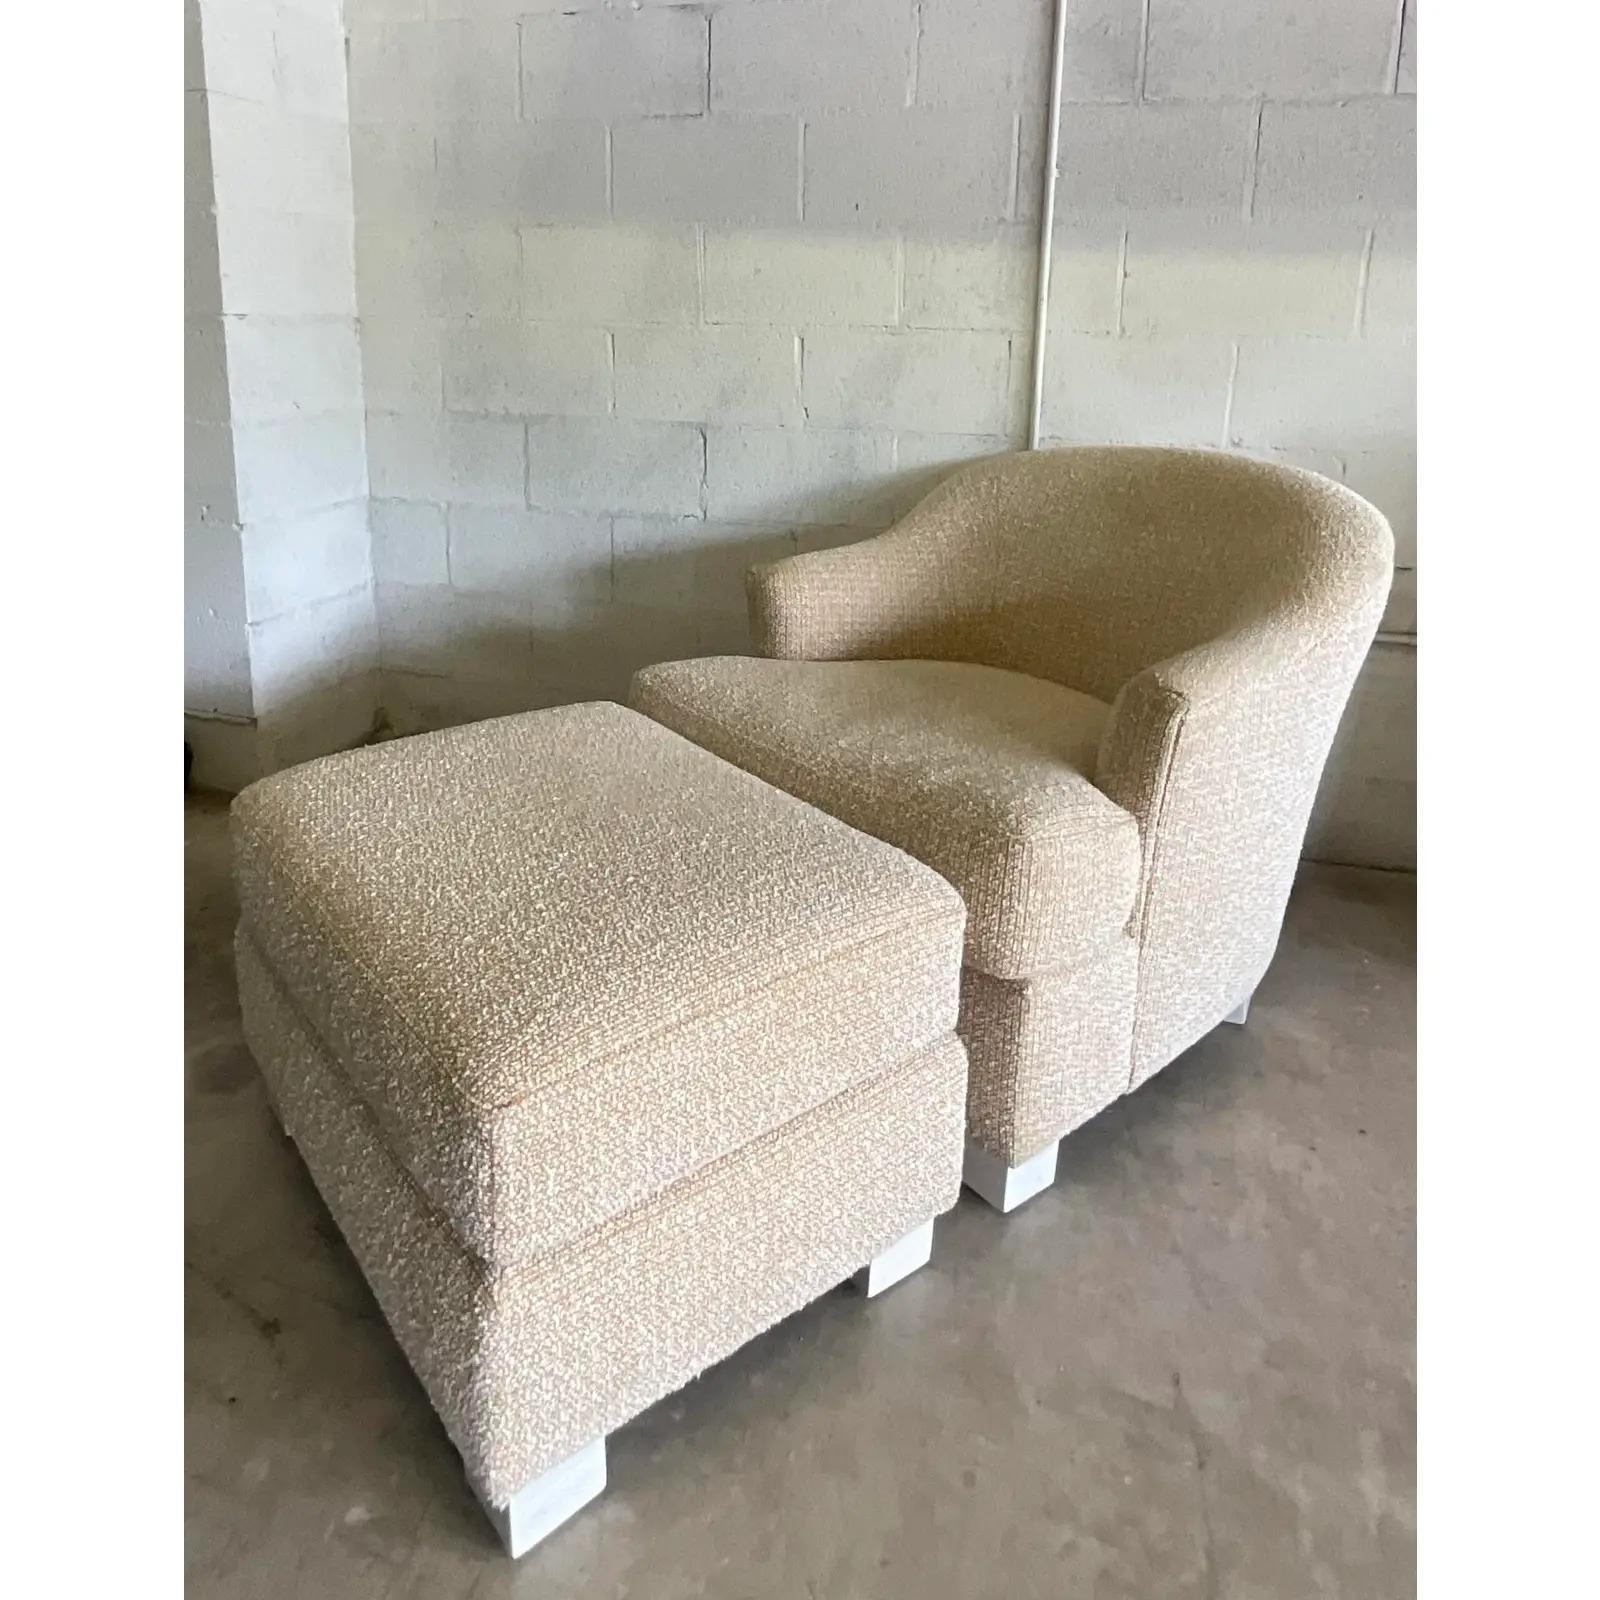 Fantastic vintage Boho Boucle chair and ottoman. Beautiful gold boucle upholstery in chic neutral colors. White block feet. Acquired from a Palm Beach estate.